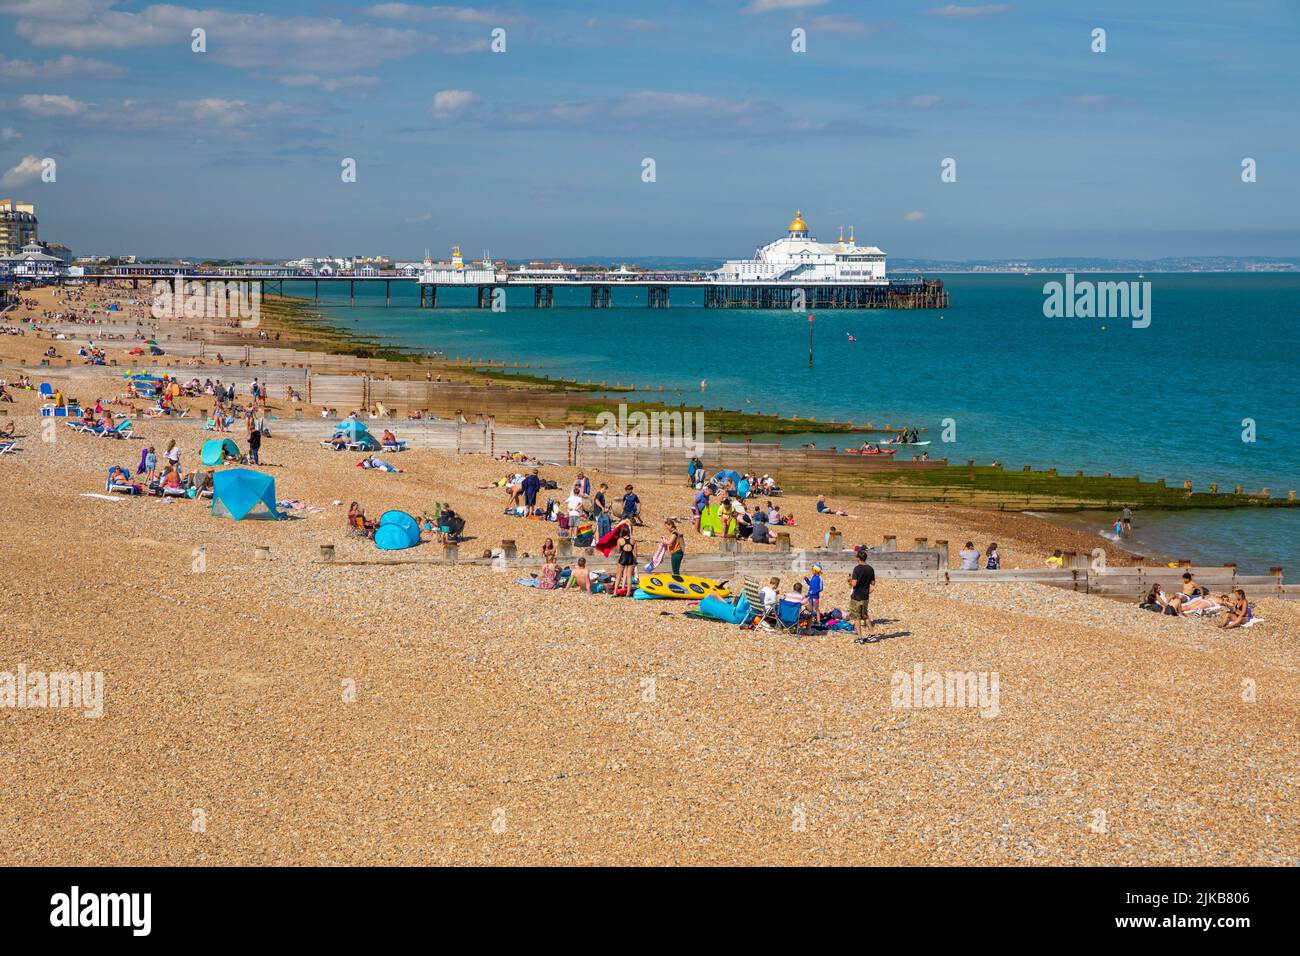 View over pebble beach to Eastbourne Pier, Eastbourne, East Sussex, England, United Kingdom, Europe Stock Photo